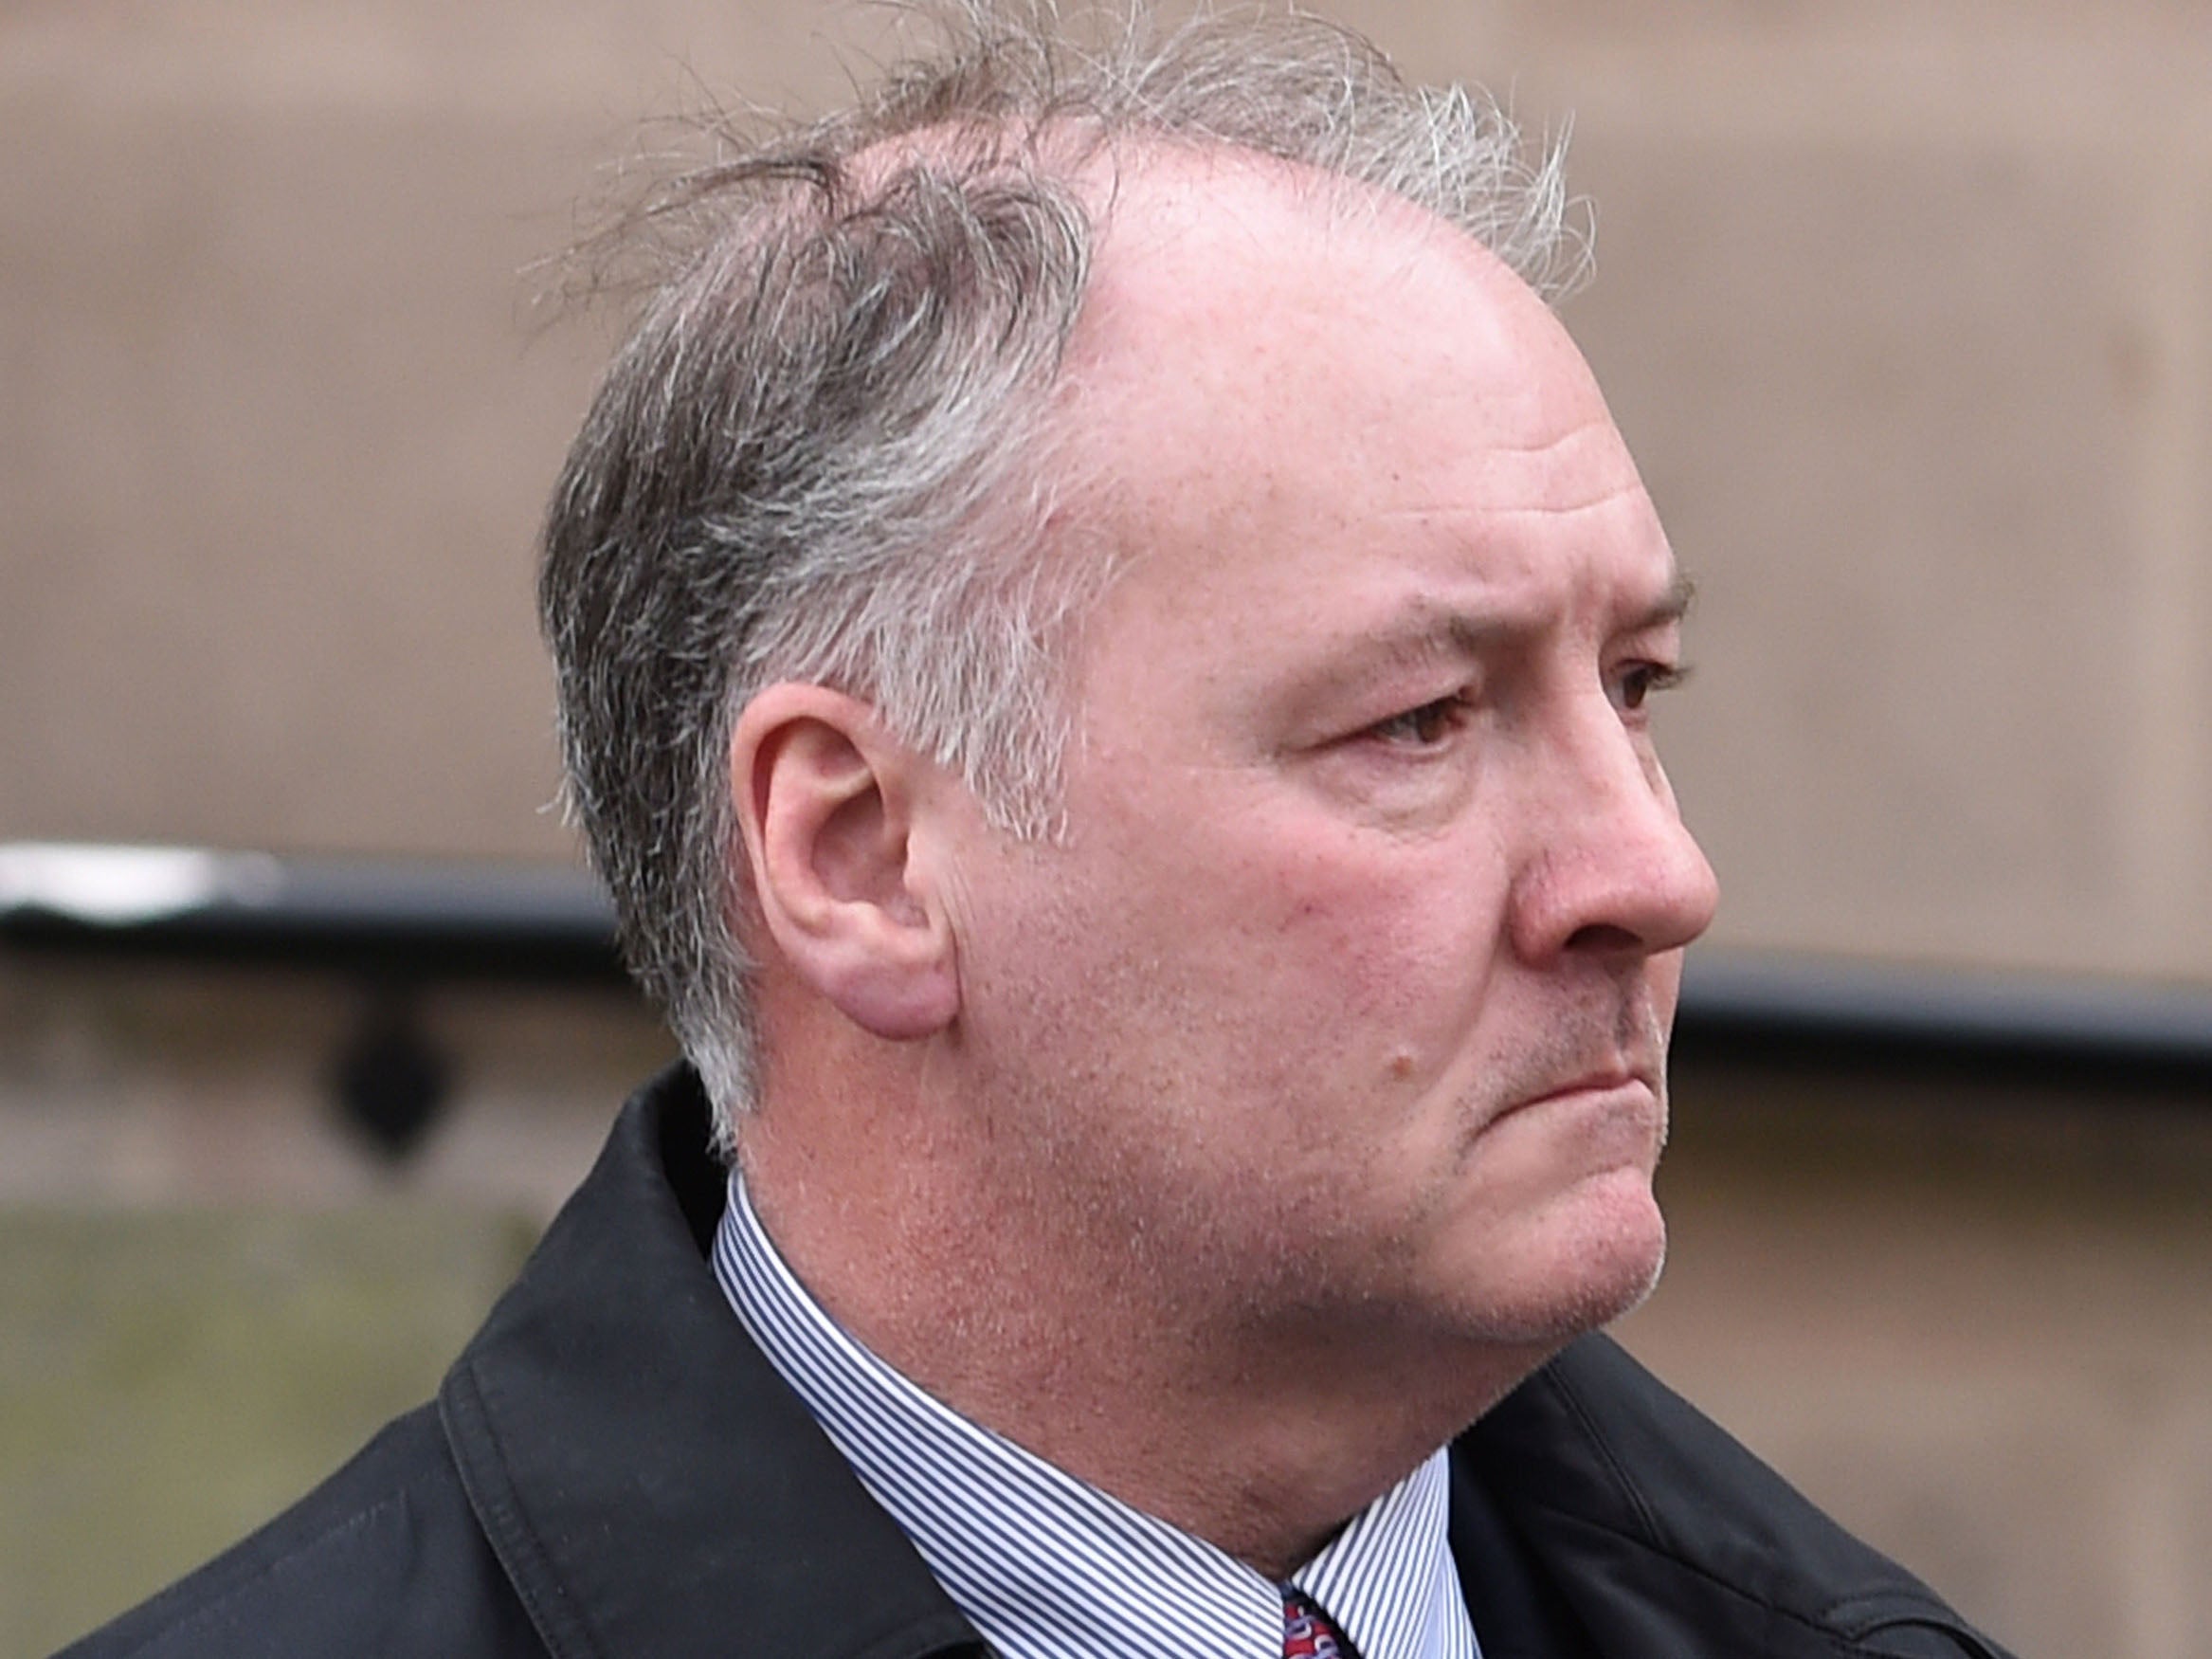 Ian Paterson was convicted for carrying out unnecessary surgery